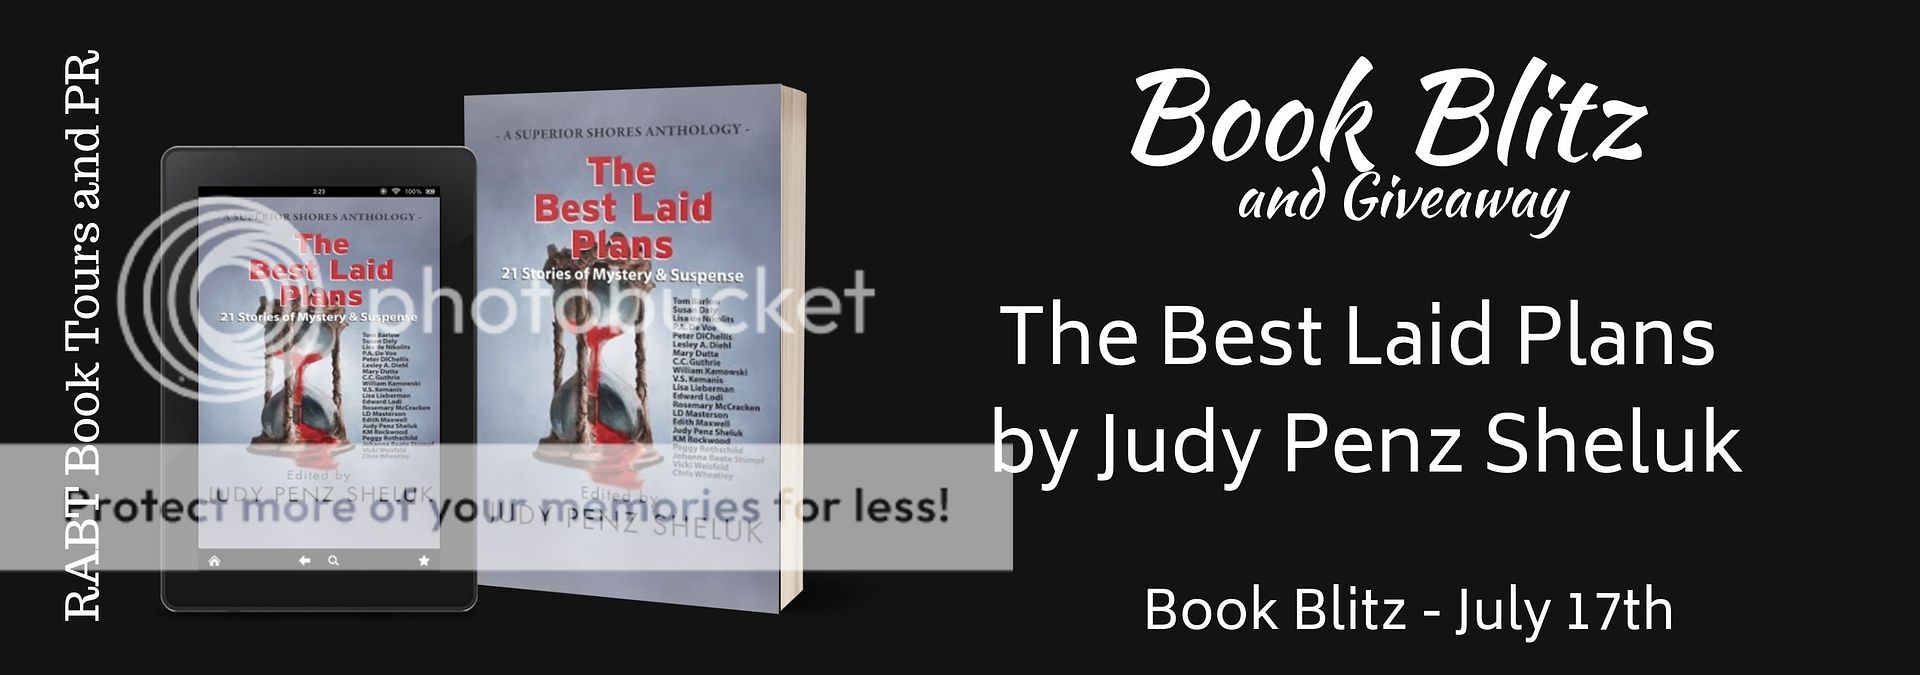 Book Blitz: The Best Laid Plans by Judy Penz Sheluk with a #giveaway #mystery #suspense #anthology @RABTBookTours @JudyPenzSheluk